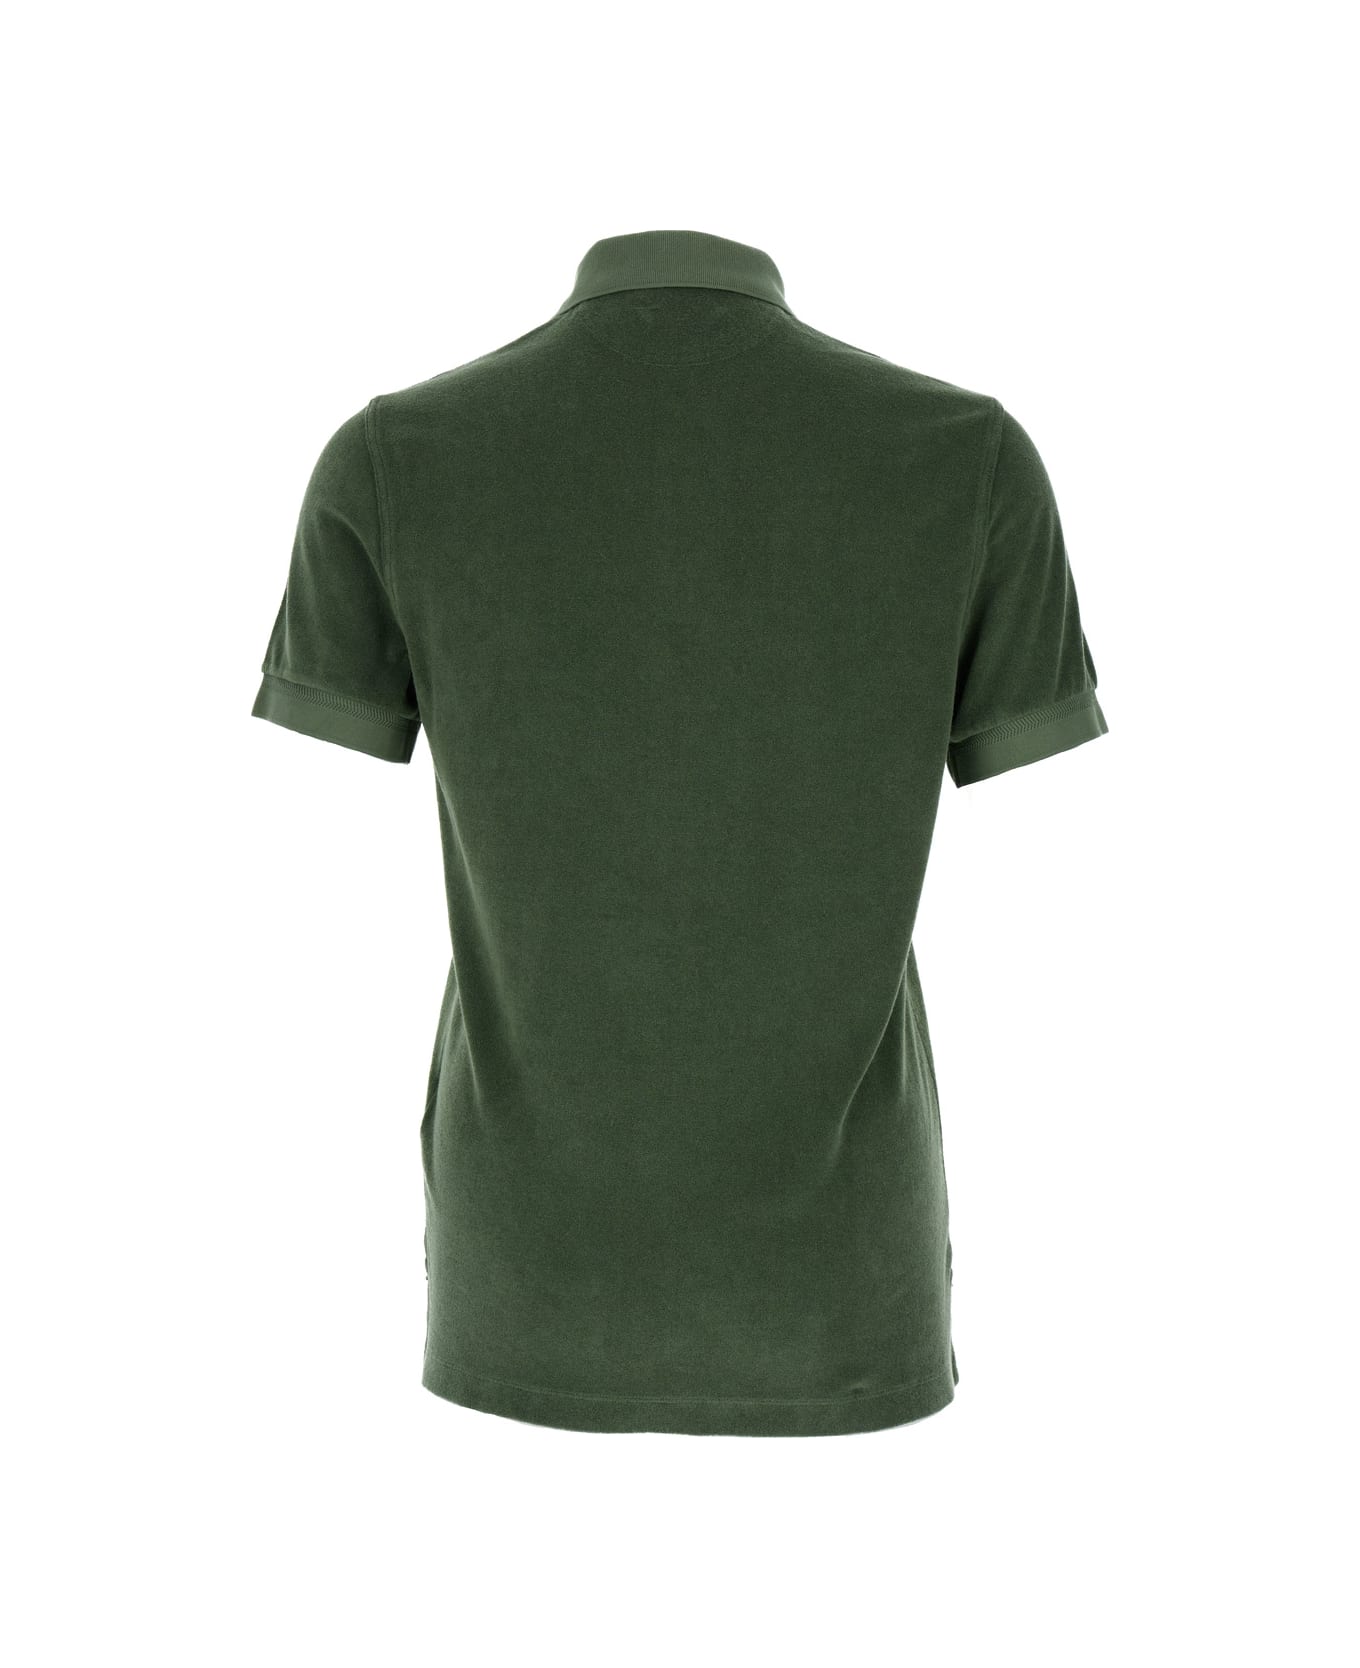 Tom Ford Green Polo T-shirt In Cotton Blend Man - Green ポロシャツ